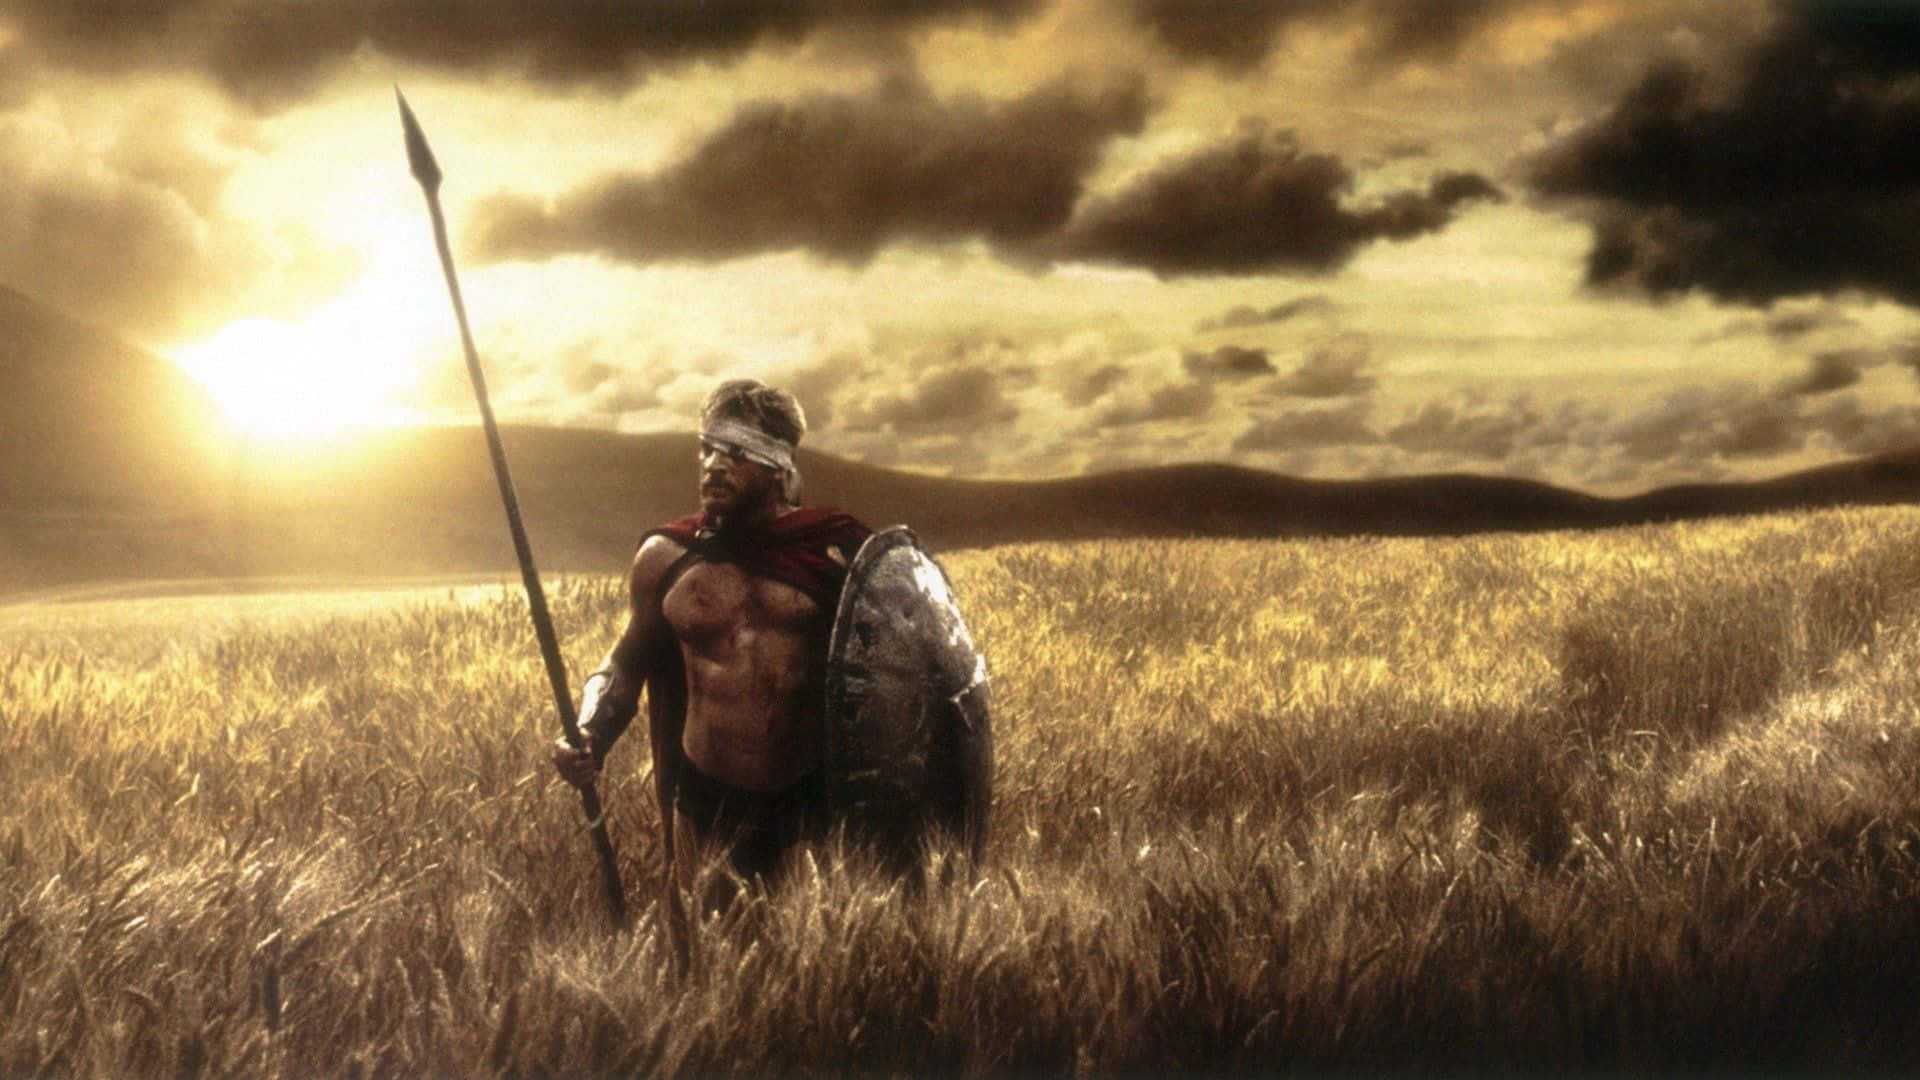 Themistocles From The 300 Movie At The Grassland Wallpaper